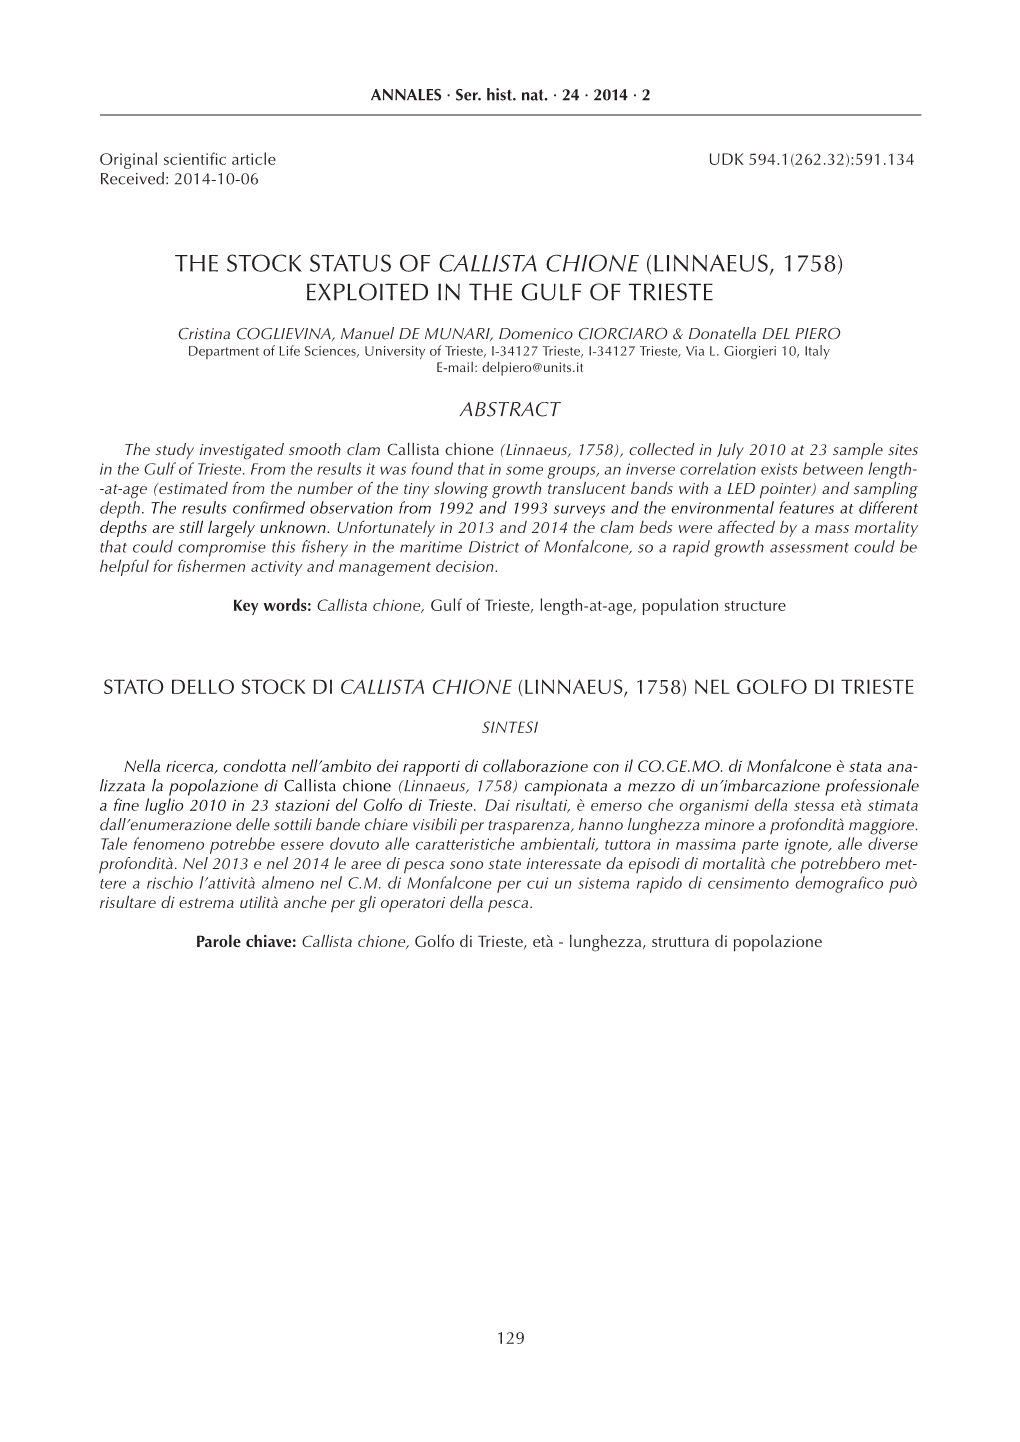 The Stock Status of Callista Chione (Linnaeus, 1758) Exploited in the Gulf of Trieste